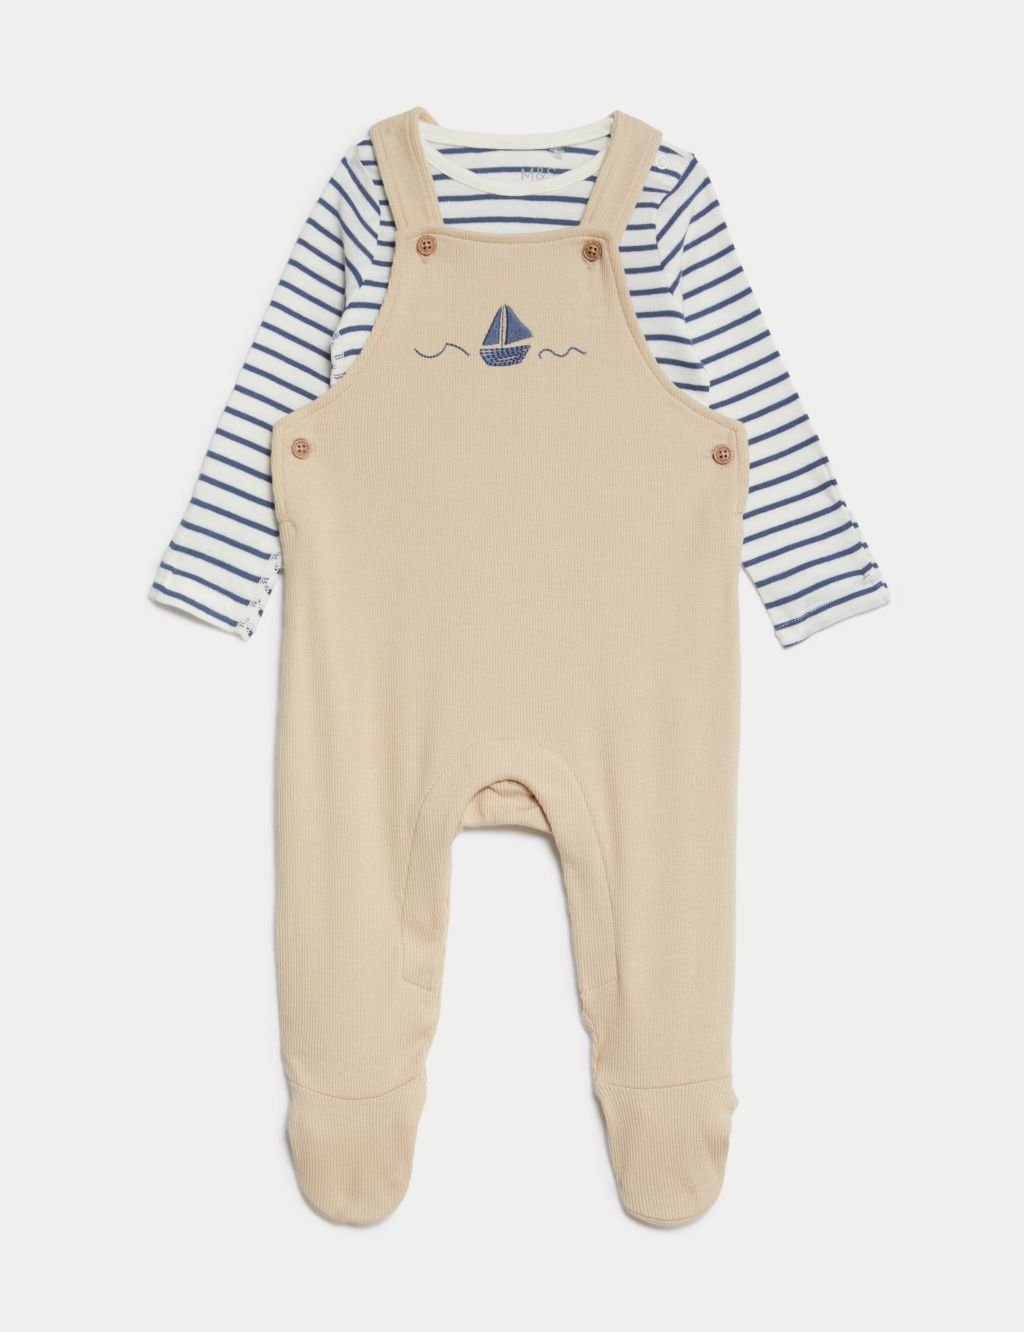 2pc Cotton Rich Striped Boat Outfit (7lbs-1 Yrs) image 2